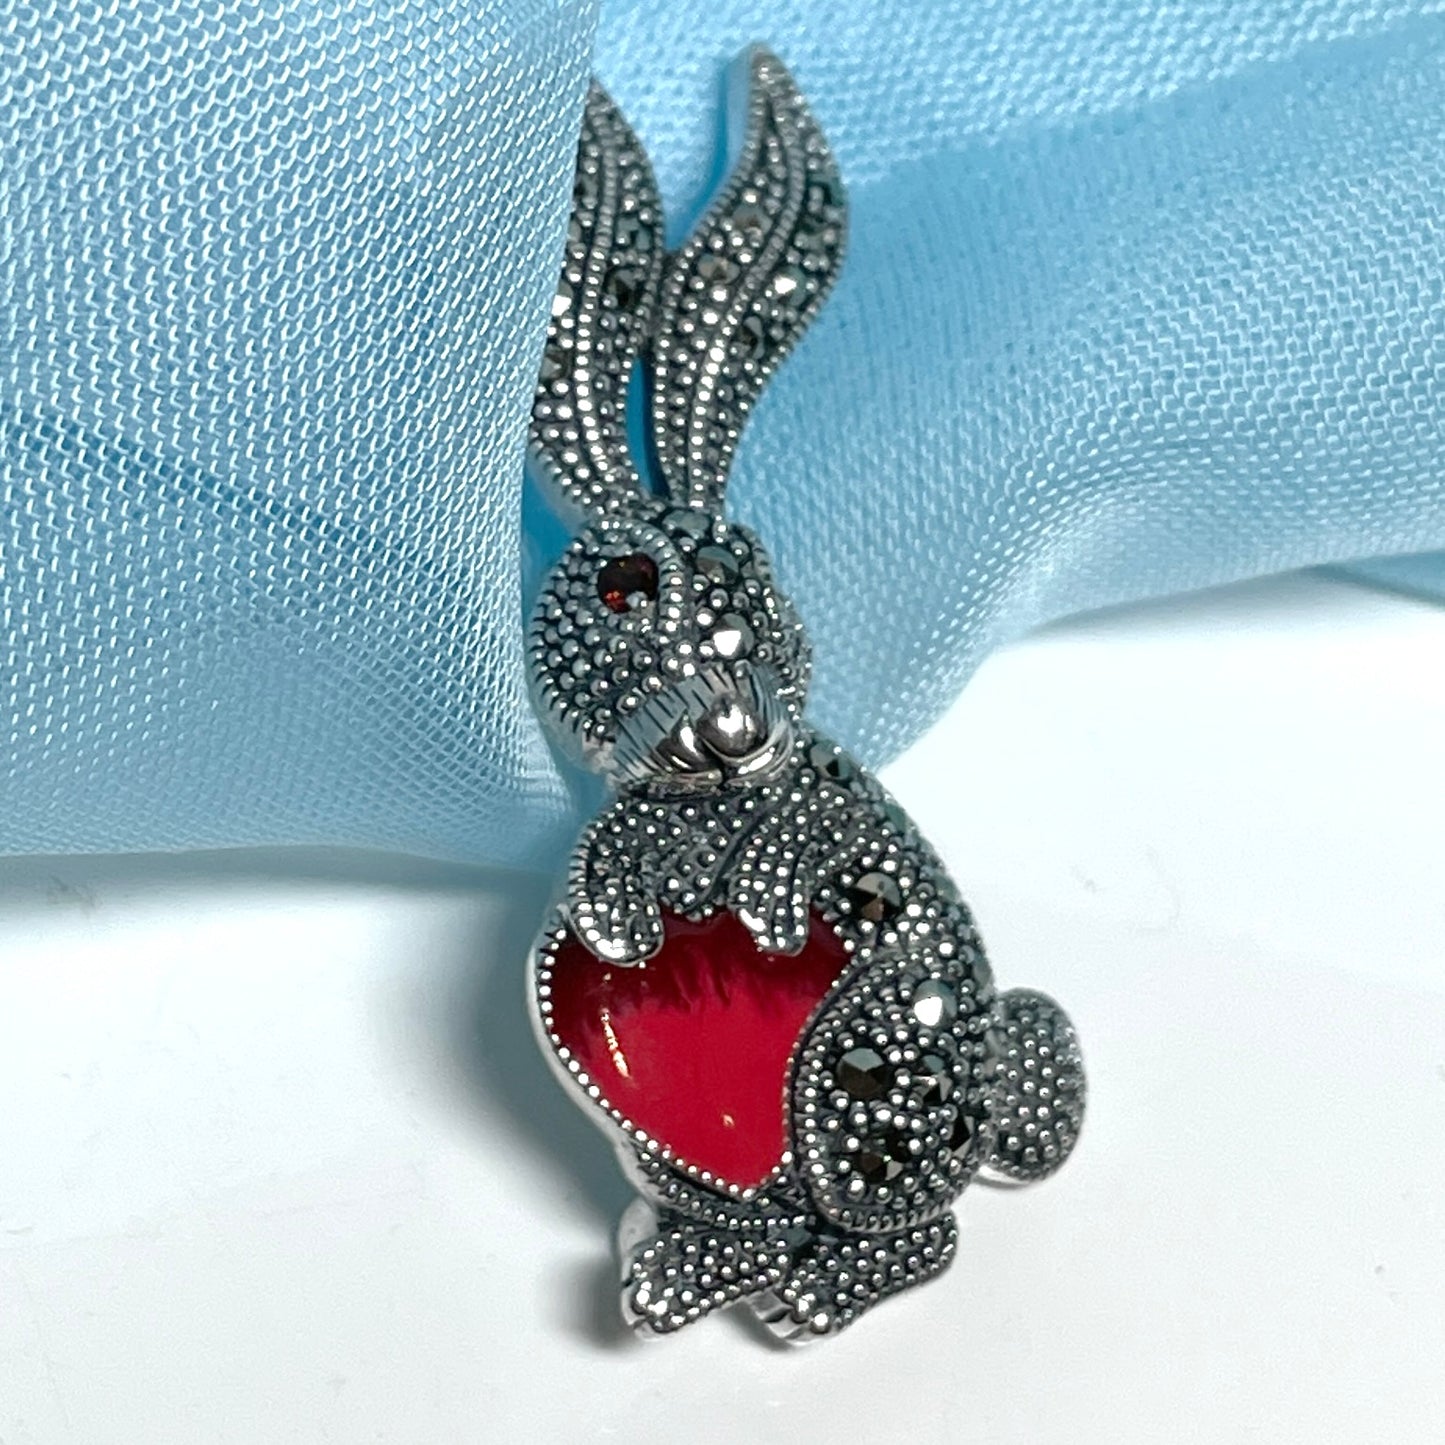 Red rabbit silver brooch necklace